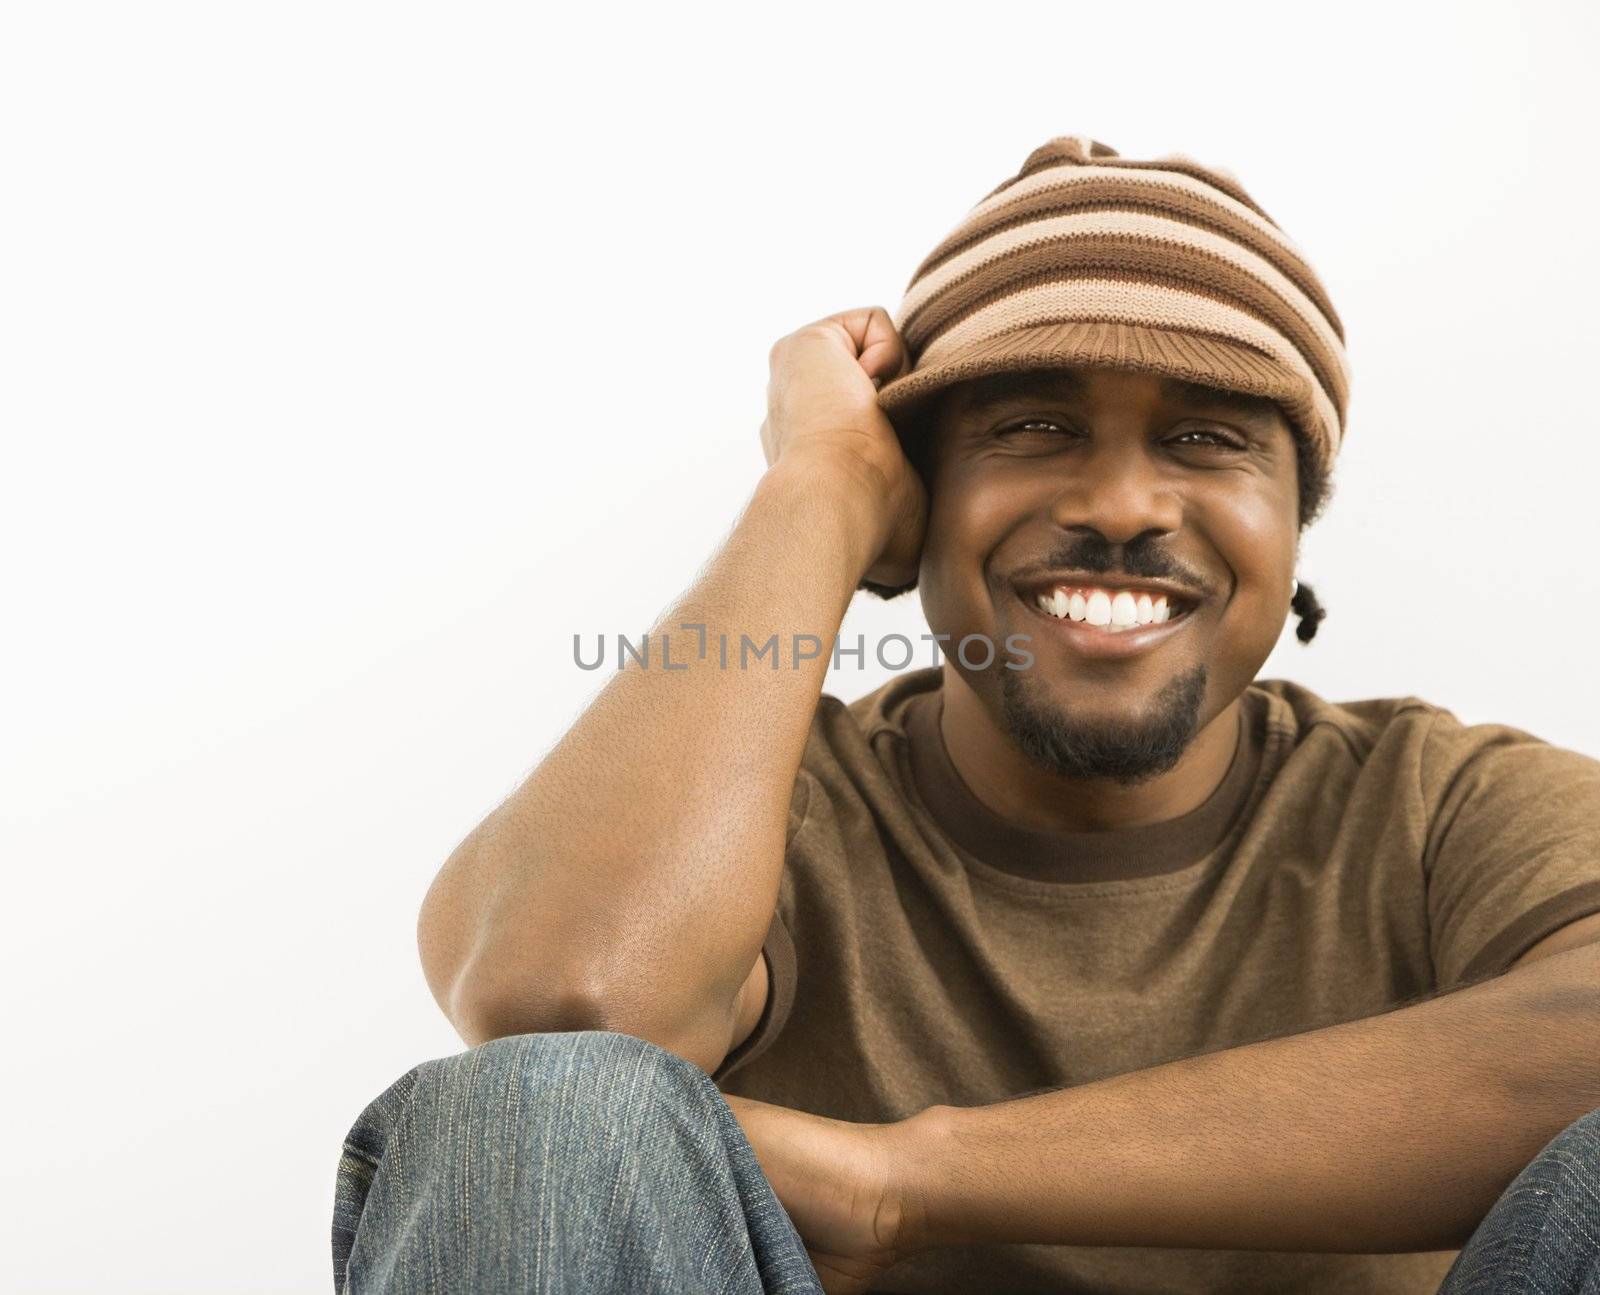 African-American mid-adult man wearing knit hat smiling at viewer.